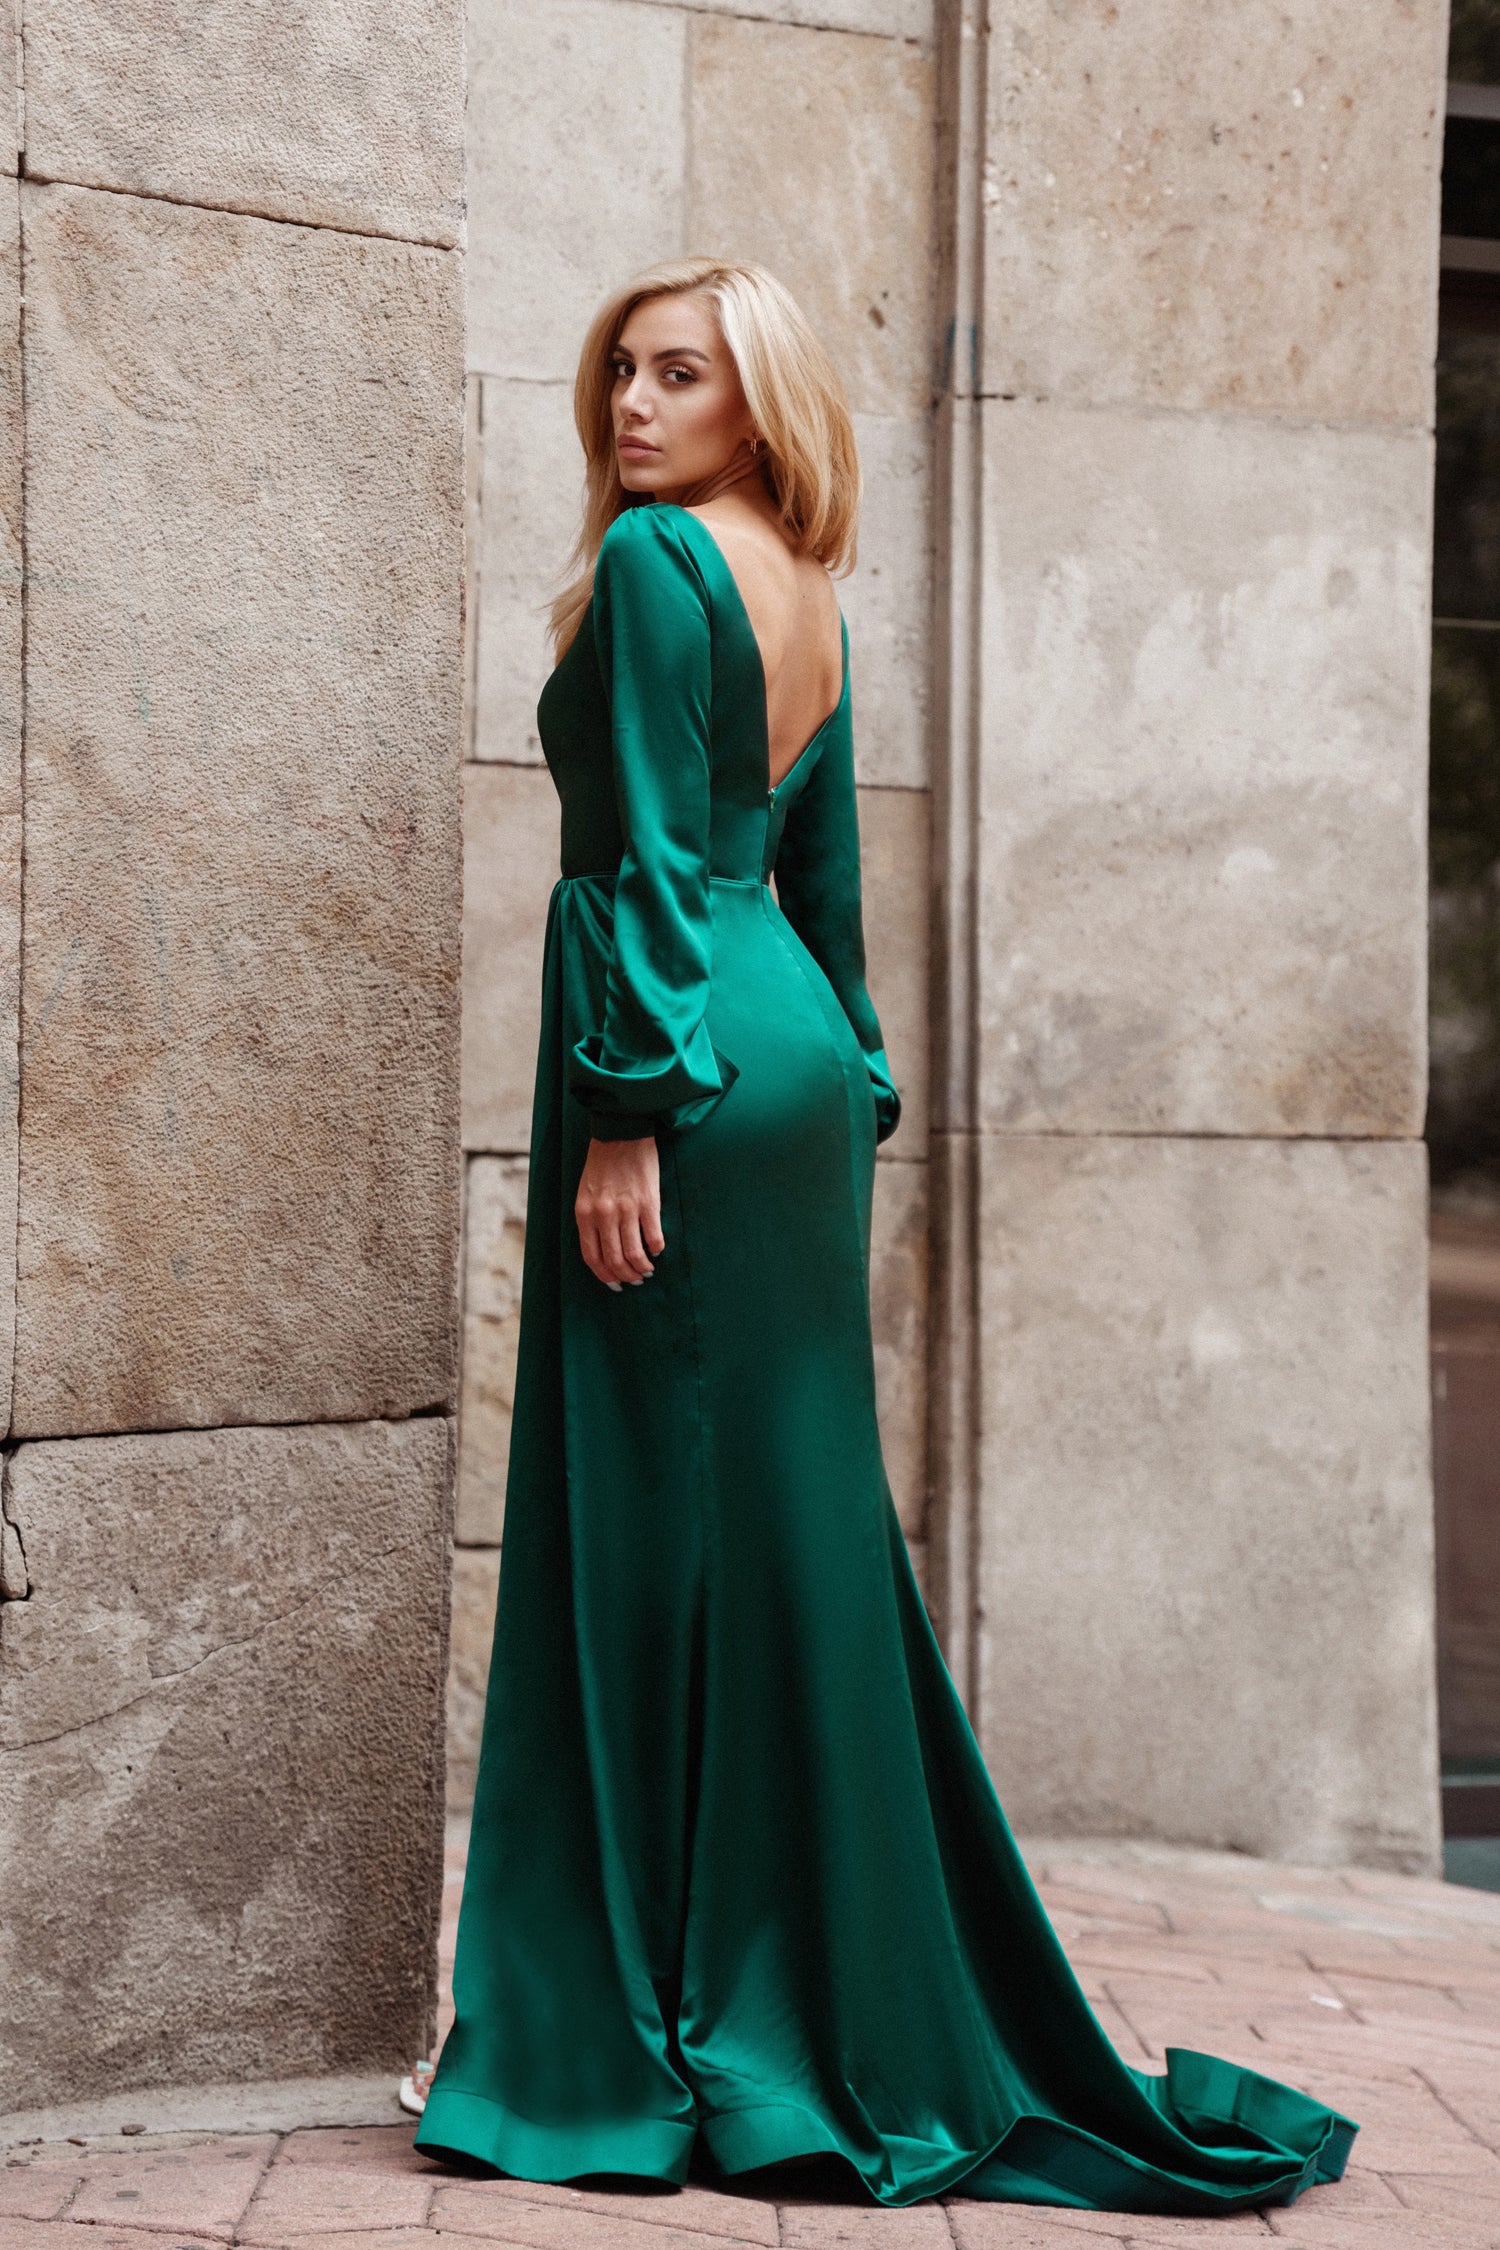 Tina Holly Couture Designer TK305 Emerald Green Silky Long Sleeved Formal Gown